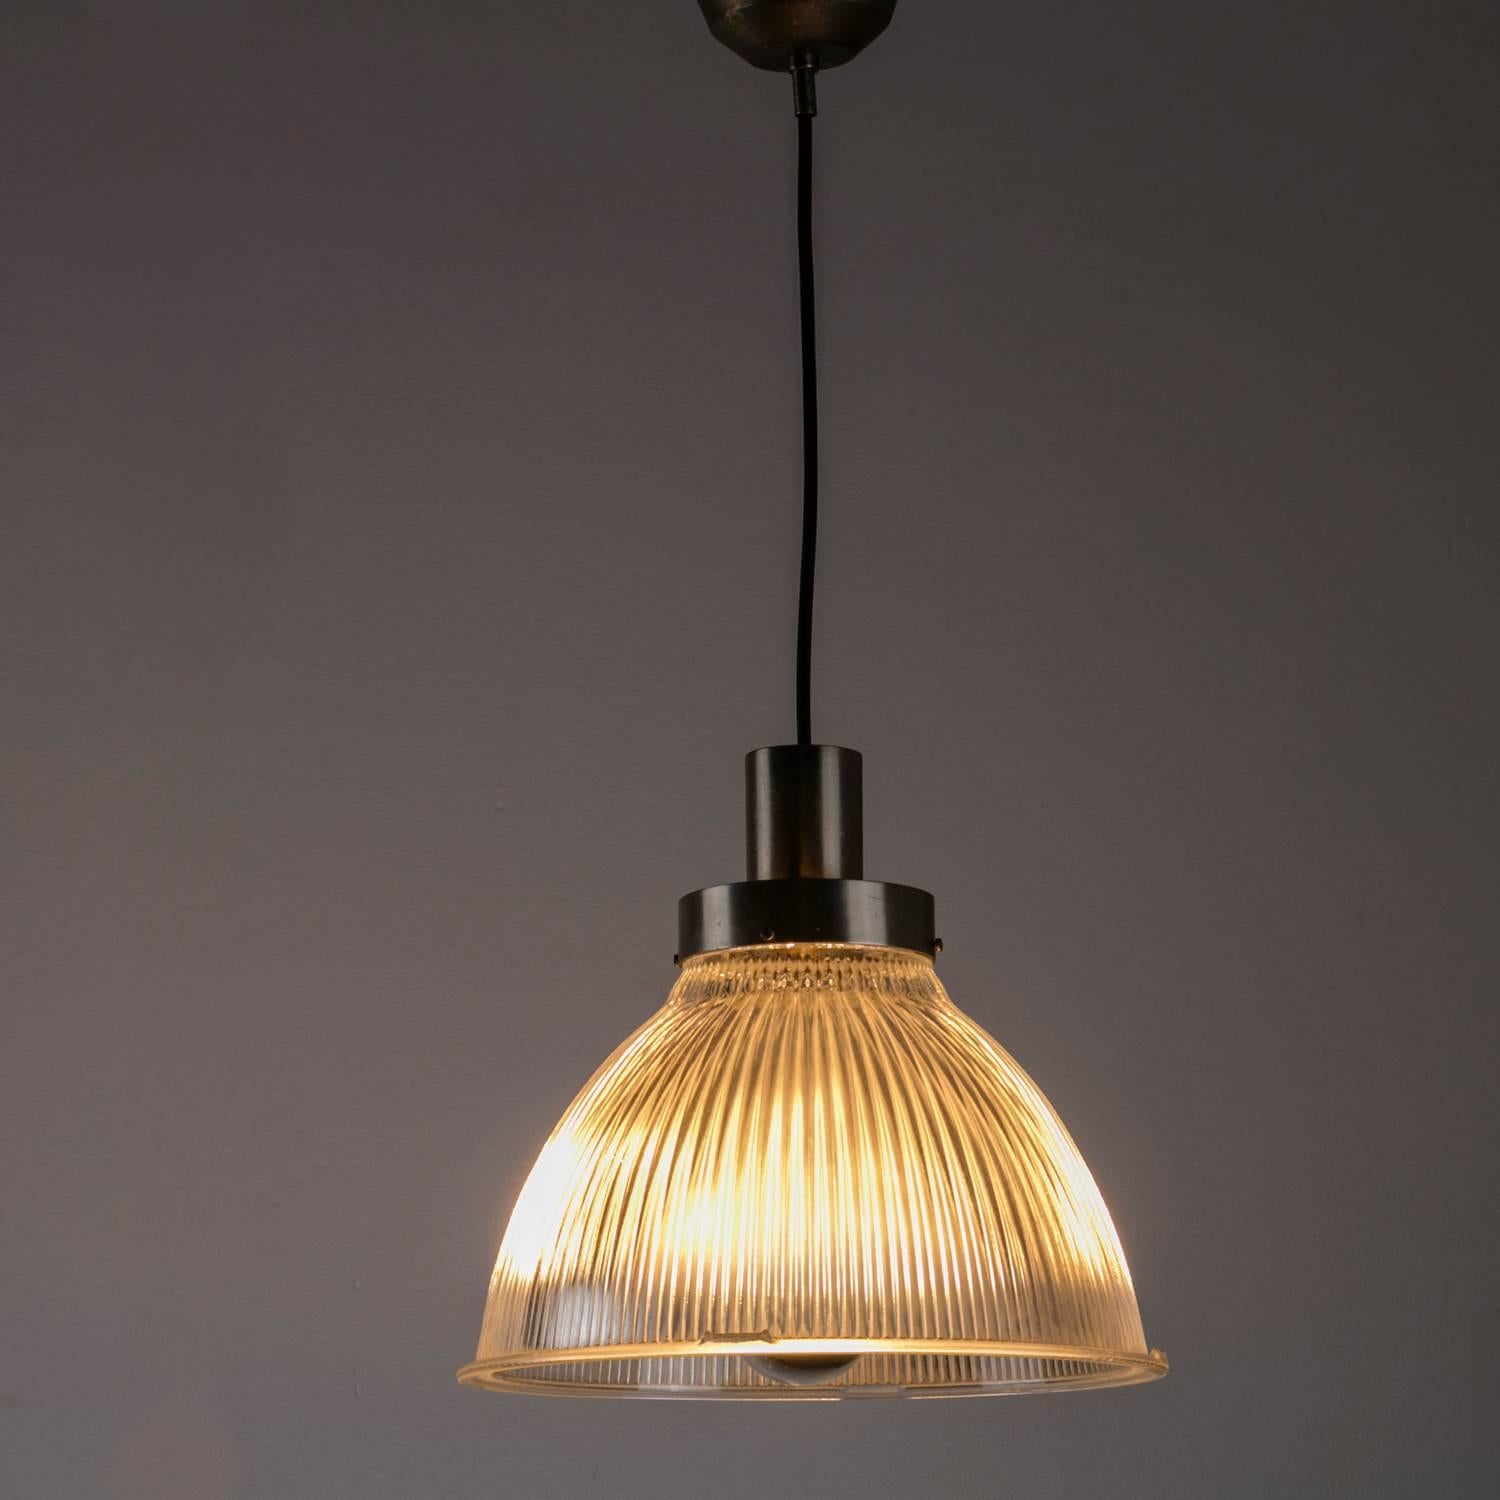 Remarkable set of two Italian 1950s pendant lamps.
Nickel-plated frame with industrial pressed glass shade, the pieces have strong connections with BBPR lamps designed for Artemide.